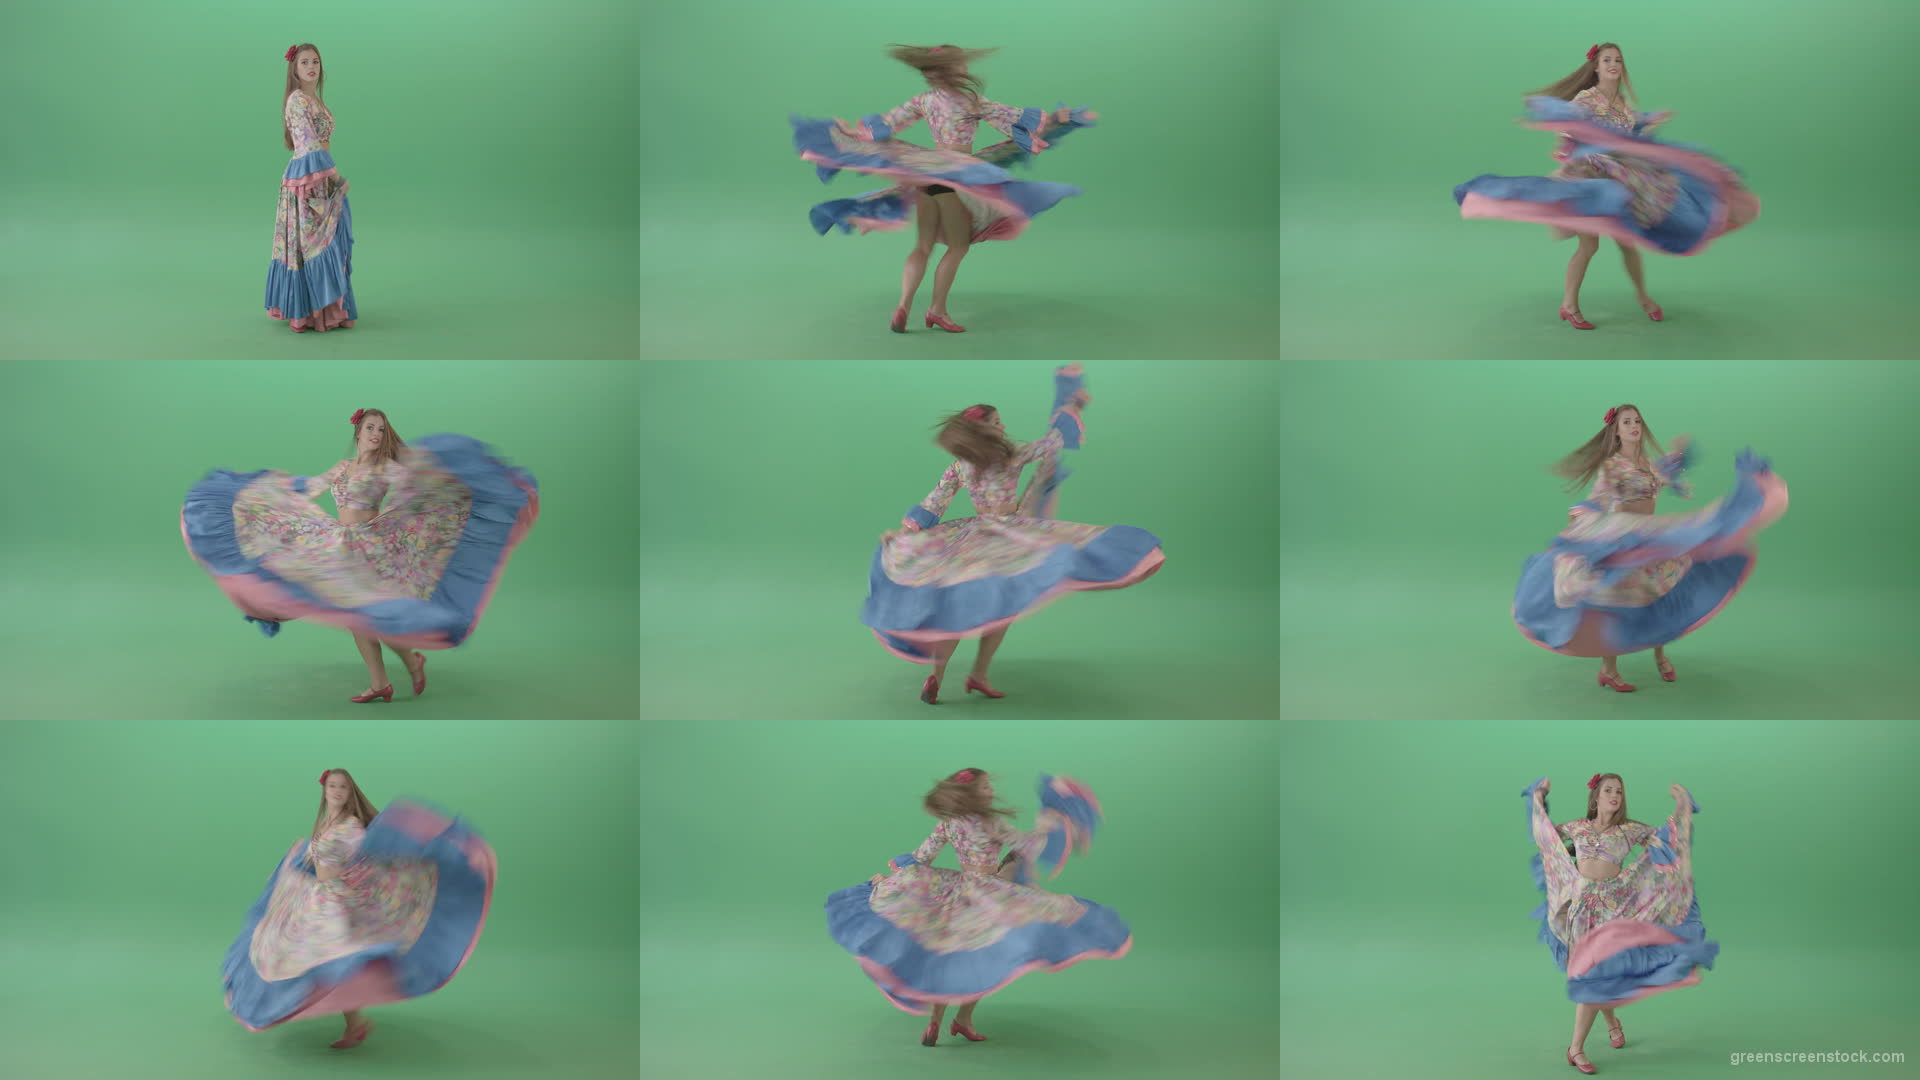 Balkan-Gipsy-Girl-spinning-and-dance-isolated-on-Green-Screen-4K-Video-Footage-1920 Green Screen Stock